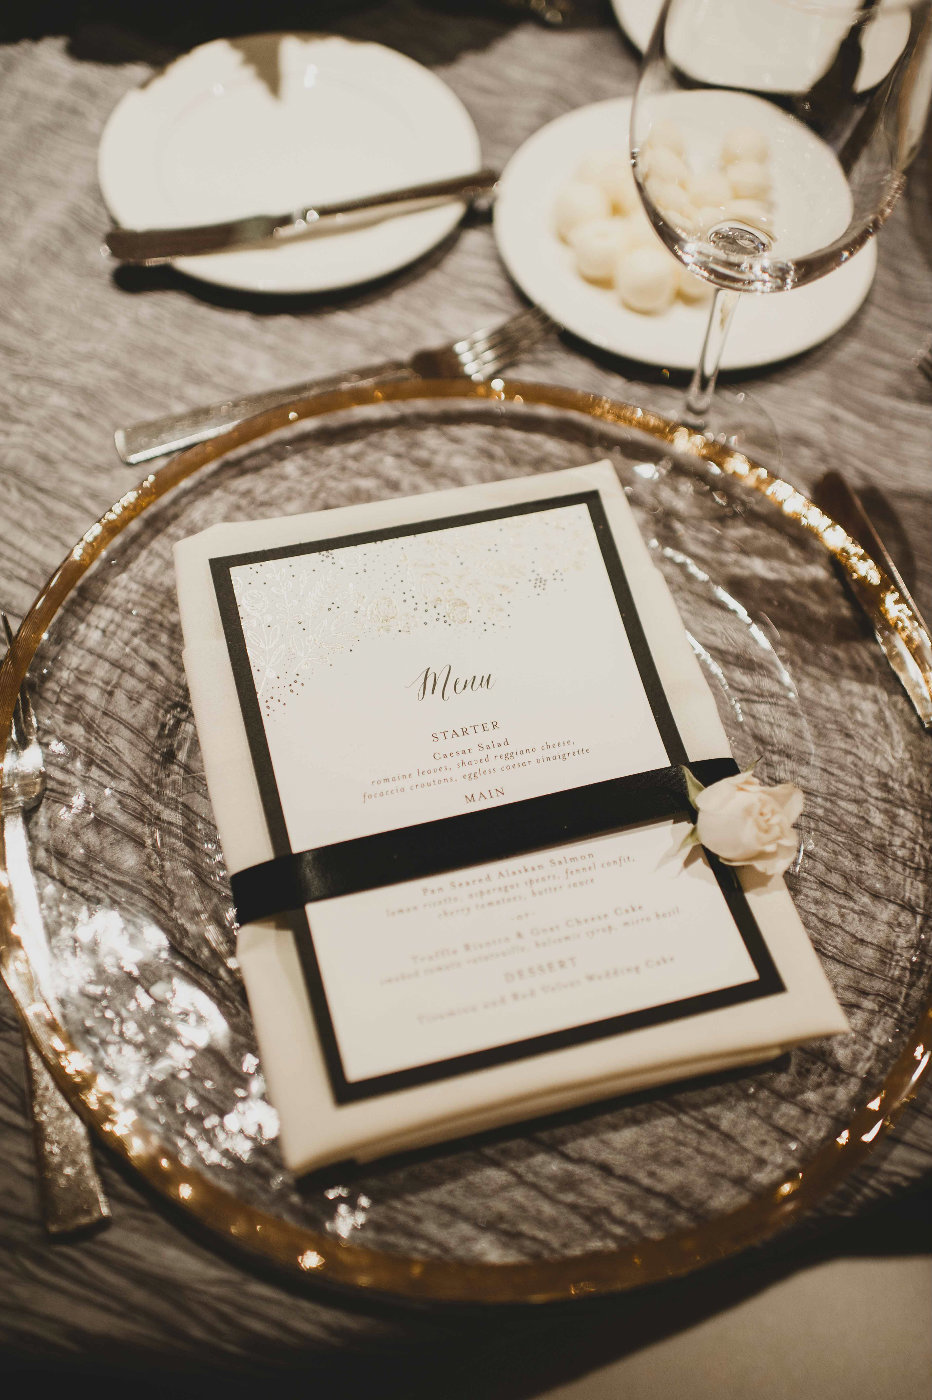 Small touches like a black ribbon around the menu and a rose at each place setting welcome your guests.